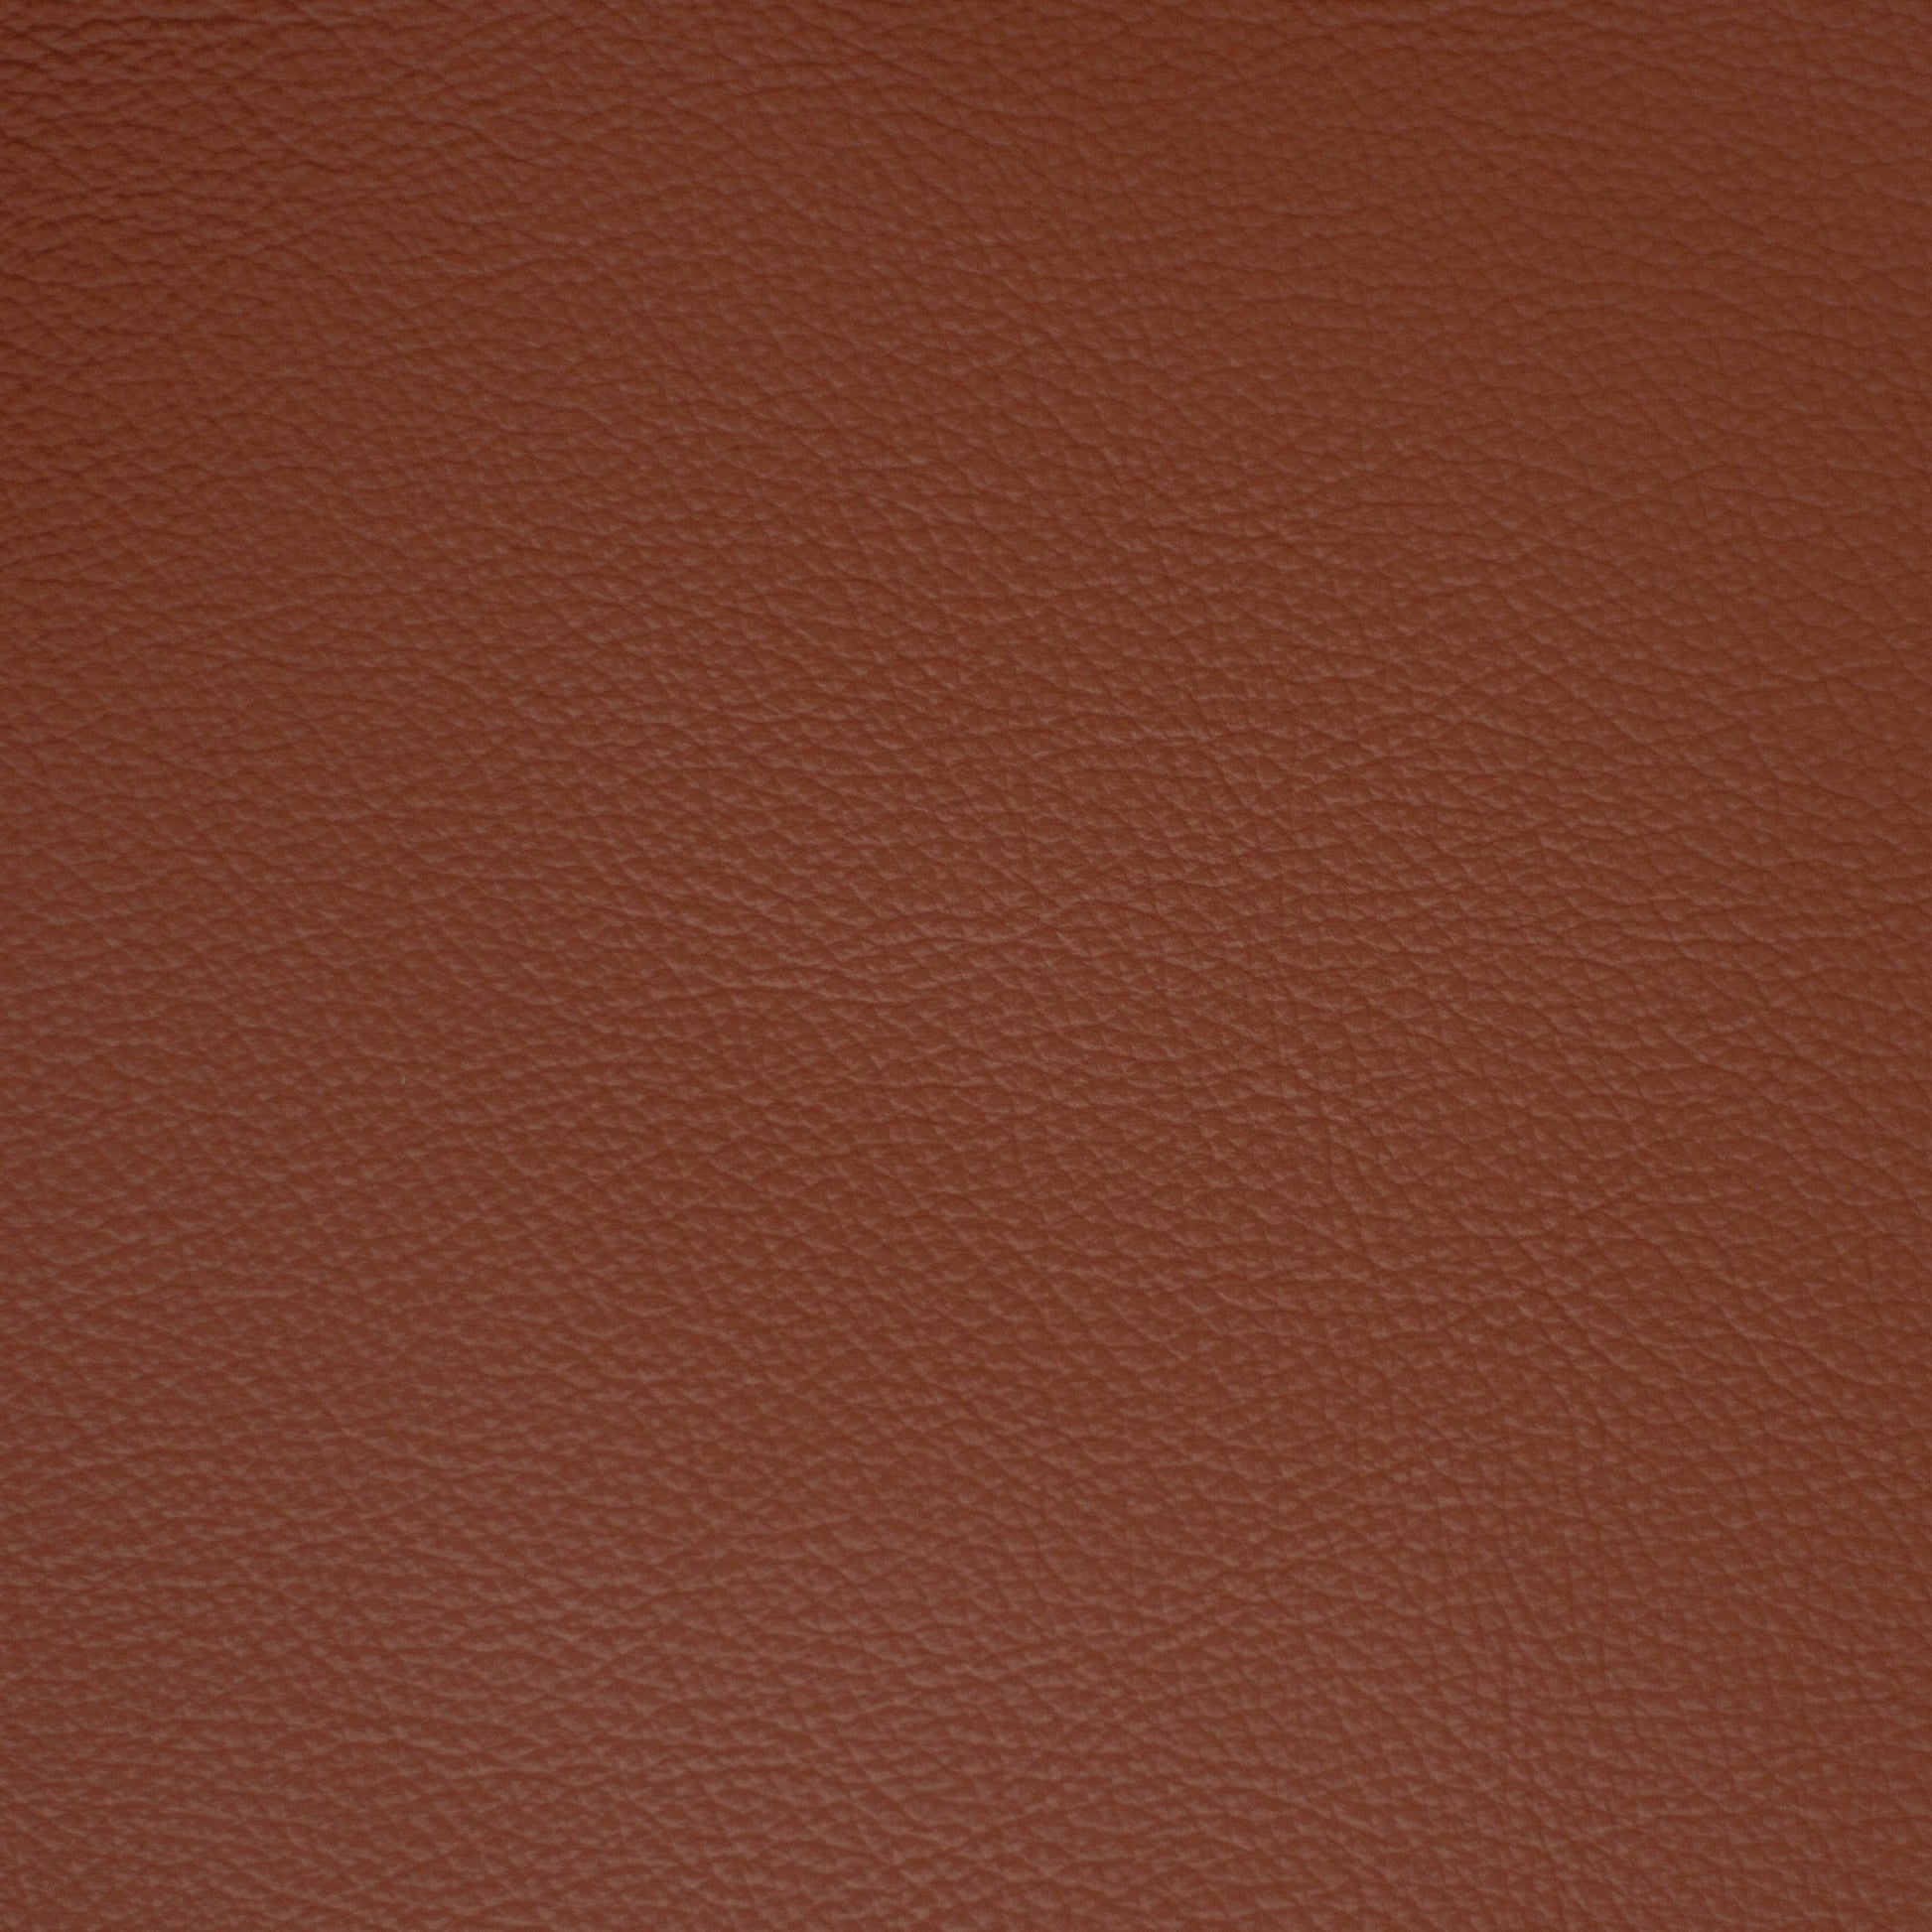 Diva, Parquet, Iconic® Antimicrobial & Cleanable, Hospitality Leather Hide